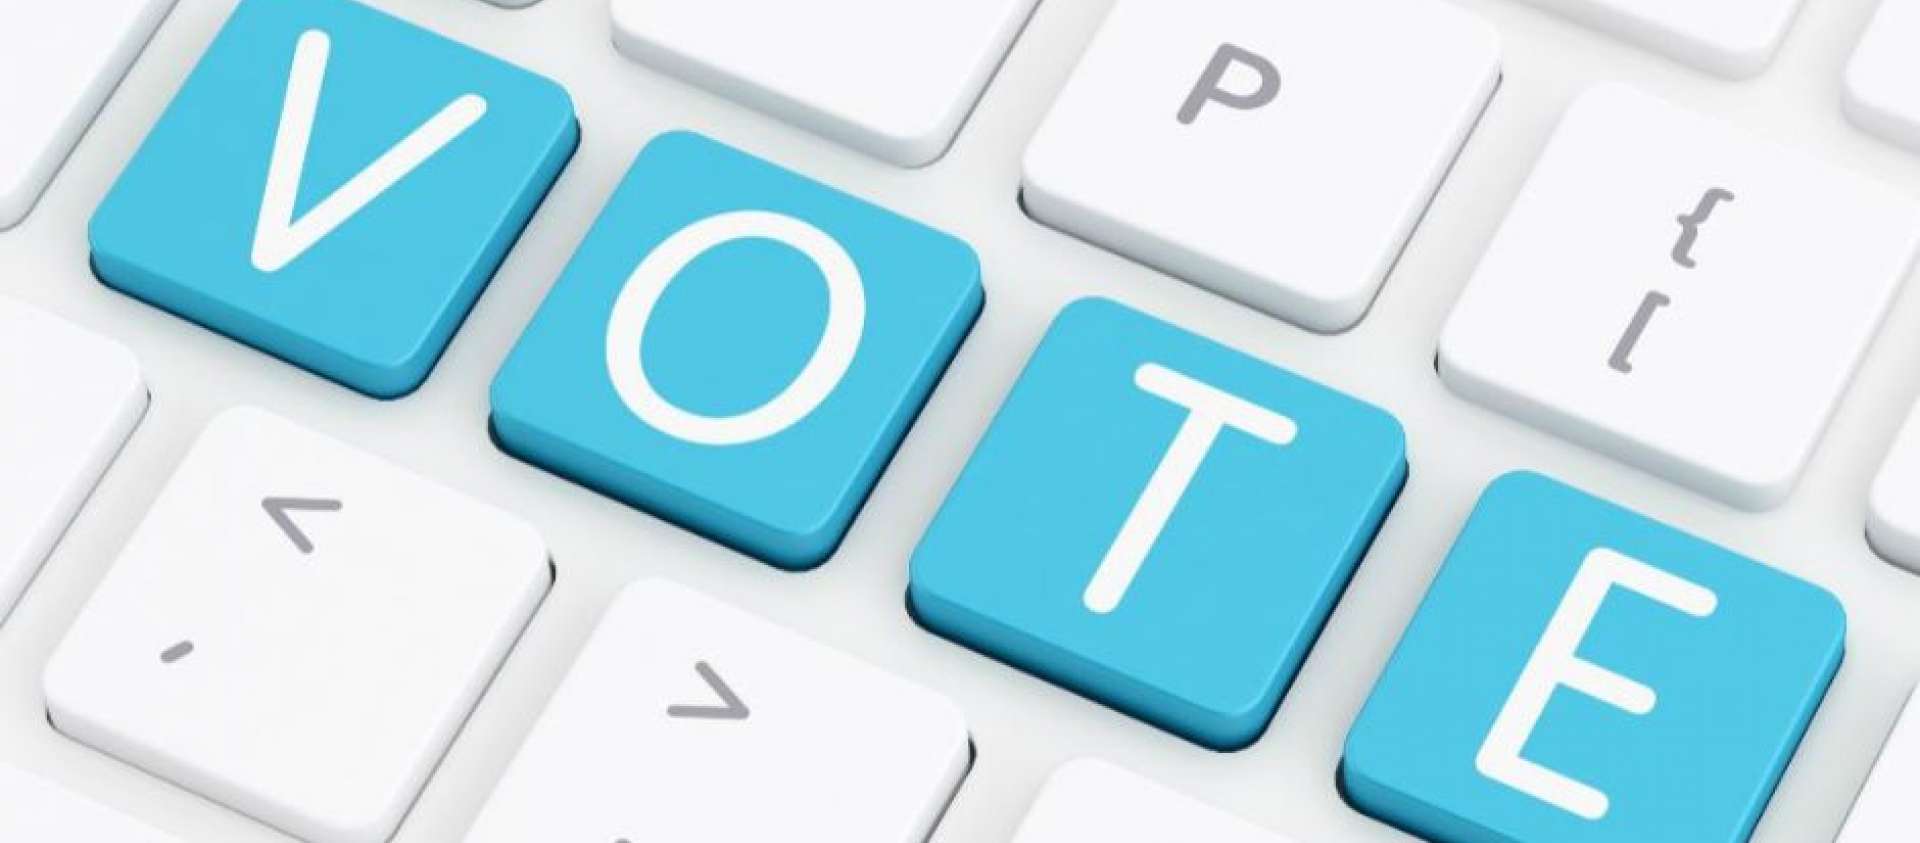 Image with vote on keyboard with heading election results